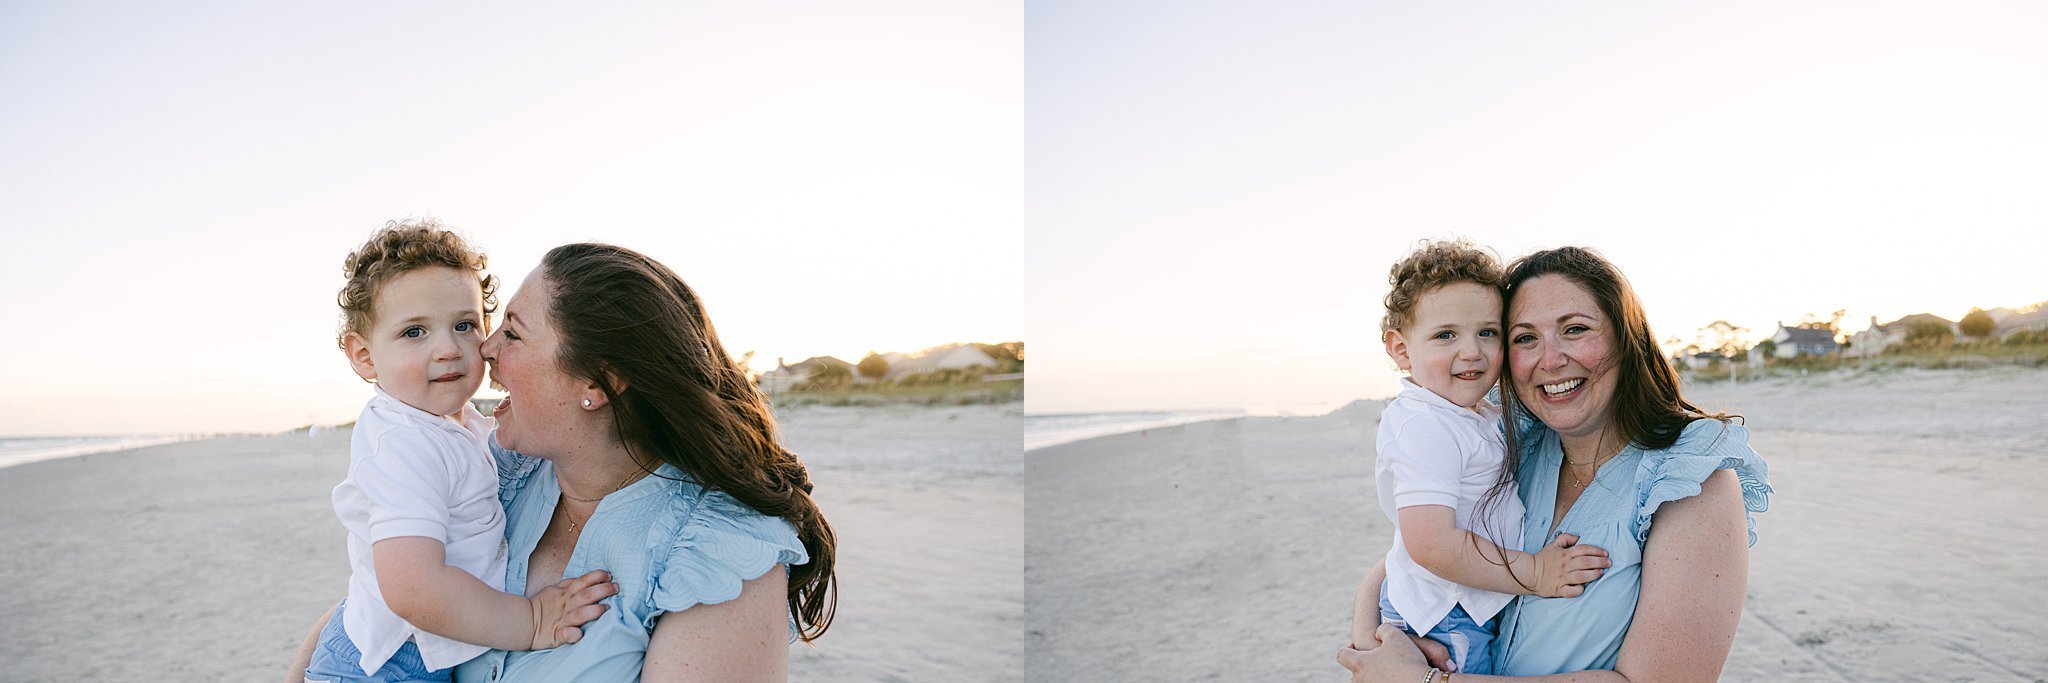 Katherine_Ives_Photography_Chod_Hilton_Head_Extended_Family_Session_98.JPG